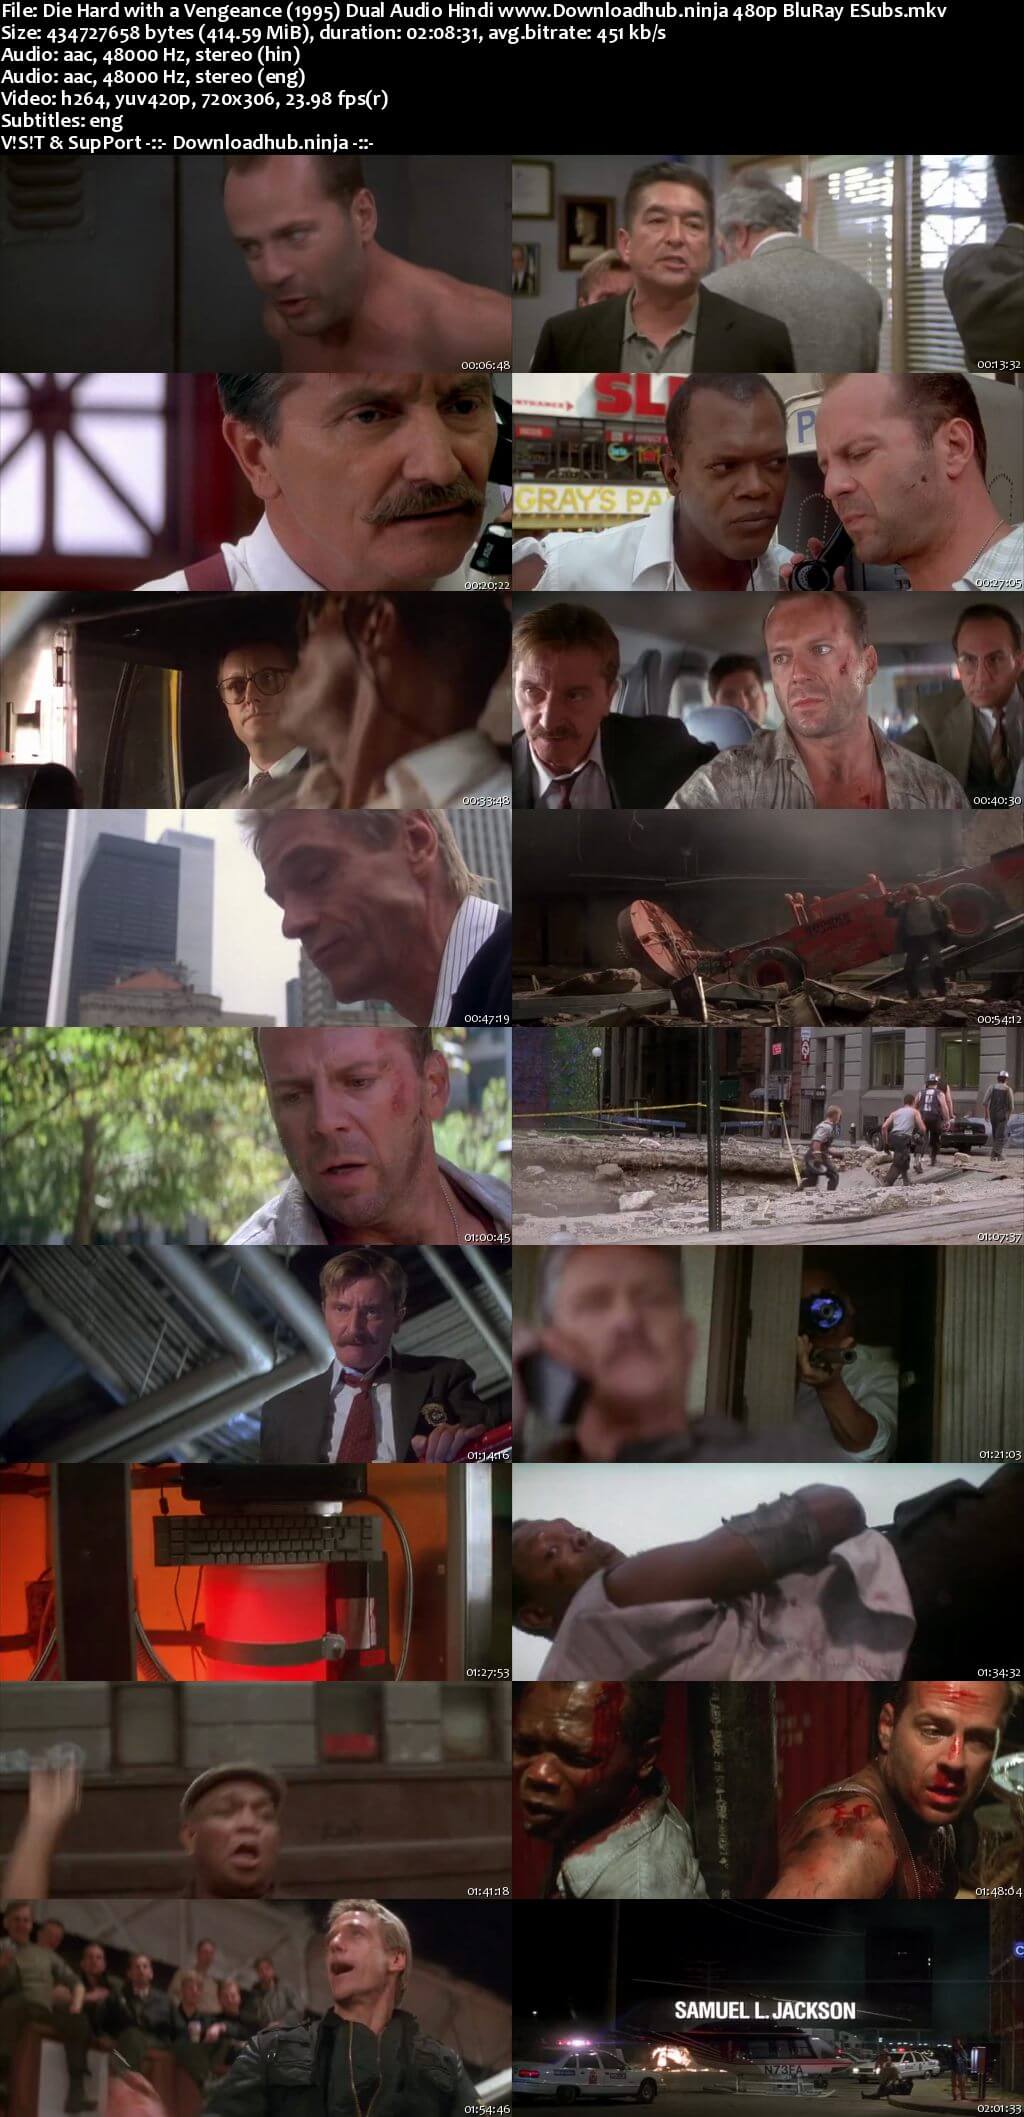 Die Hard With a Vengeance 1995 Hindi Dual Audio 400MB BluRay 480p ESubs